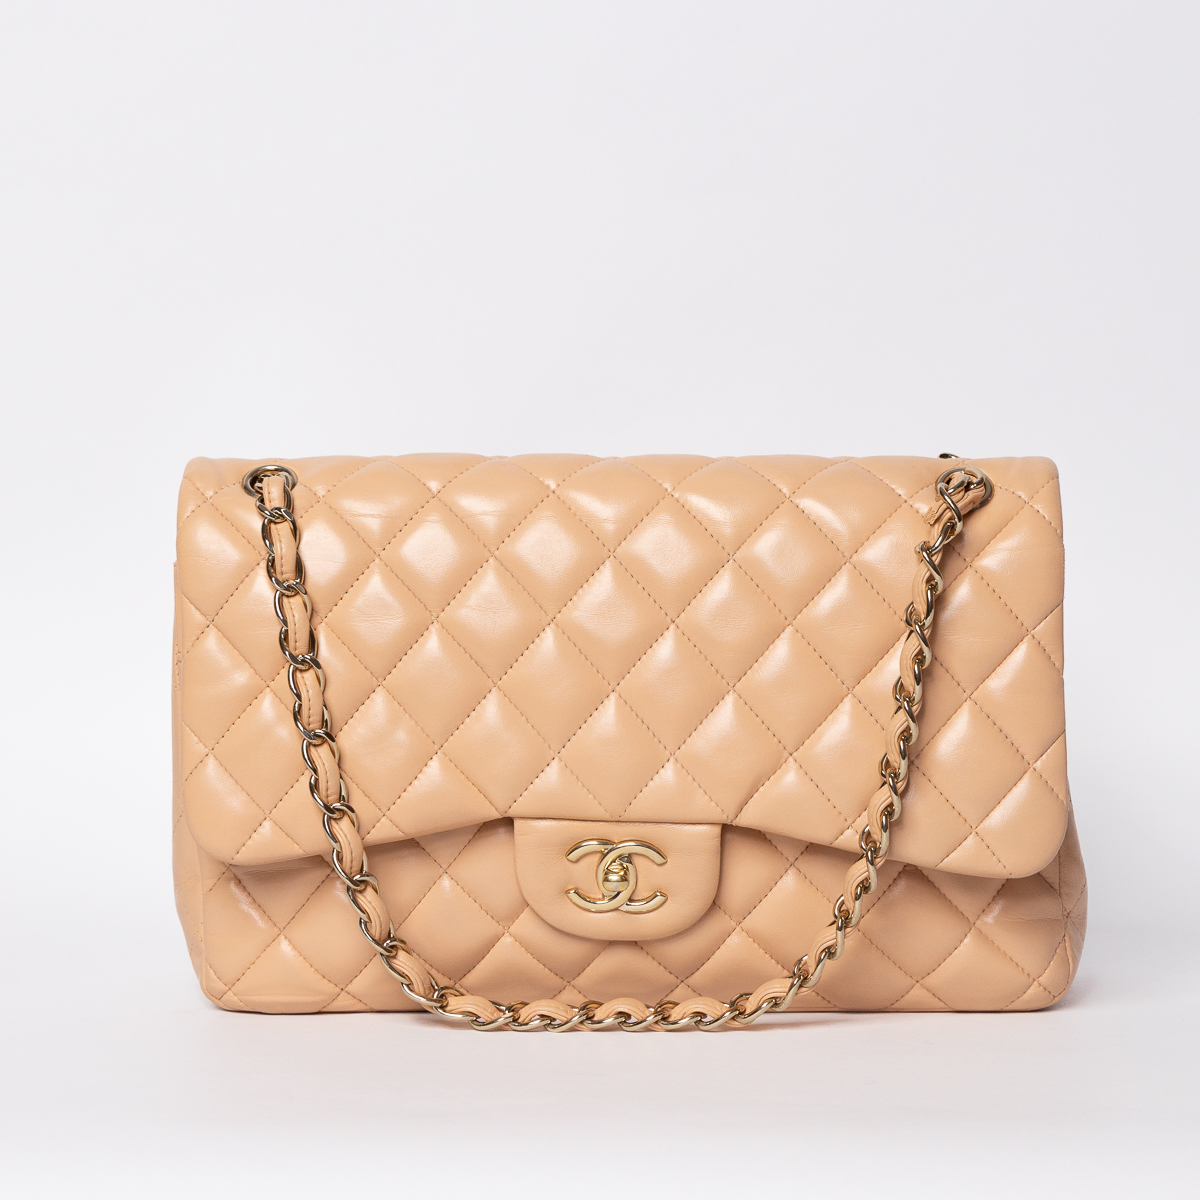 Chanel Double Flap Jumbo Bag Apricot bag with gold hardware